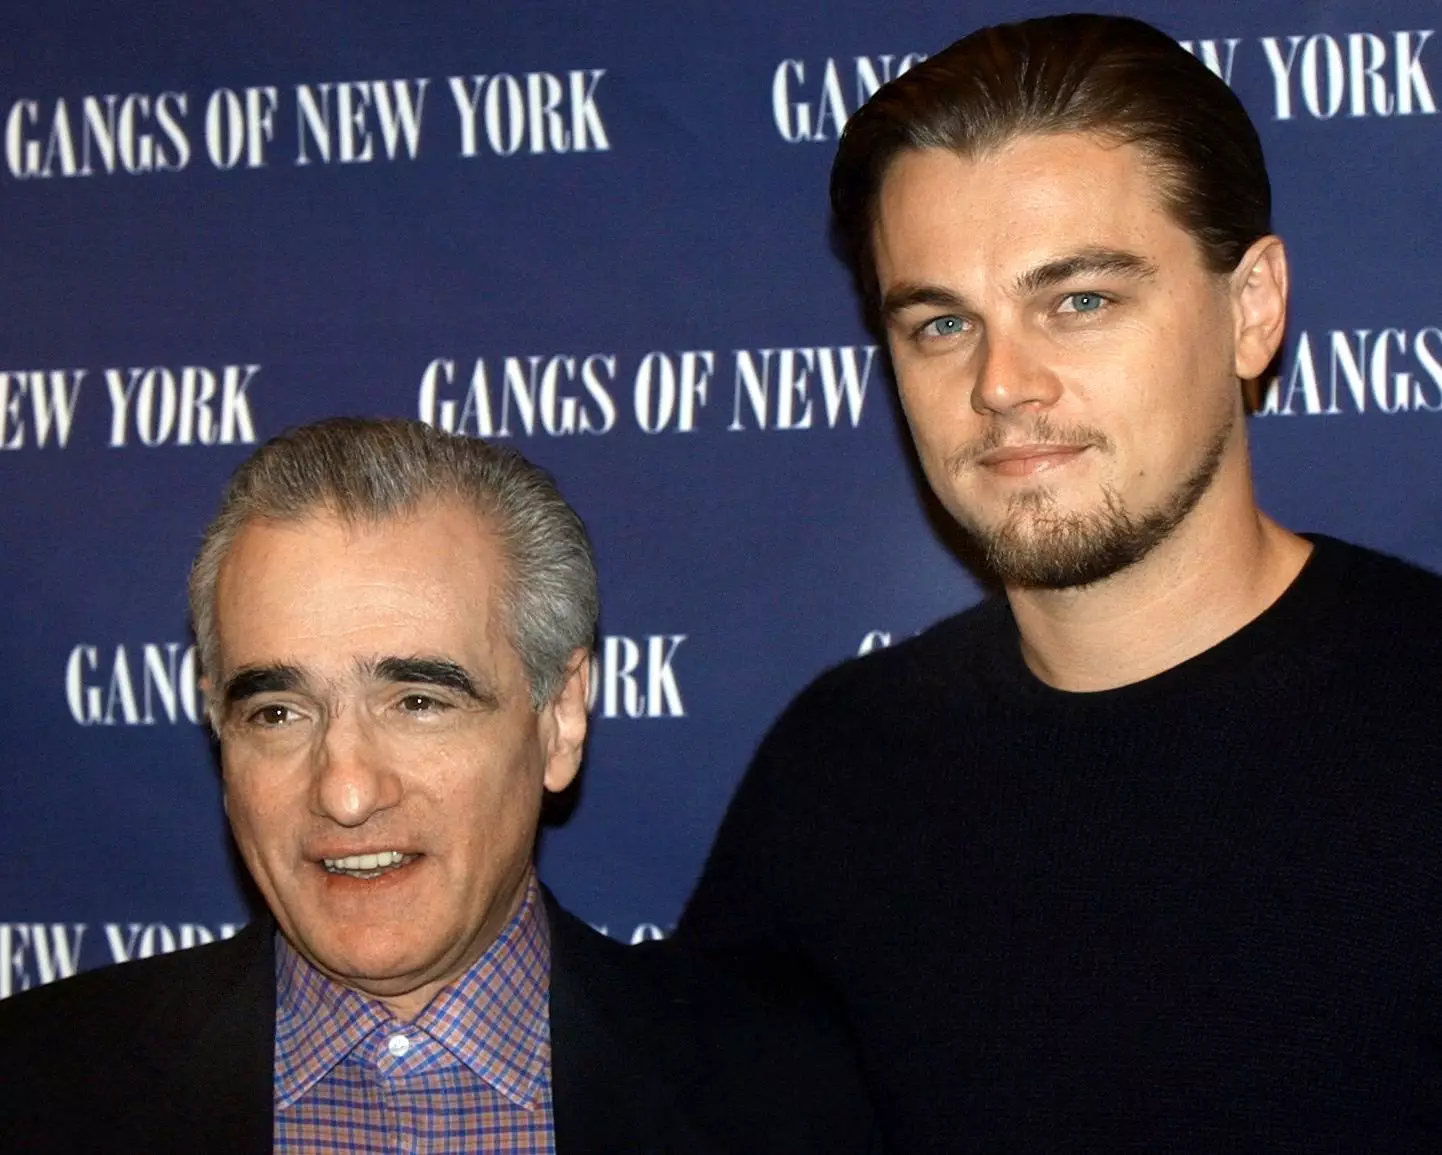 DiCaprio and Scorsese have worked together before.